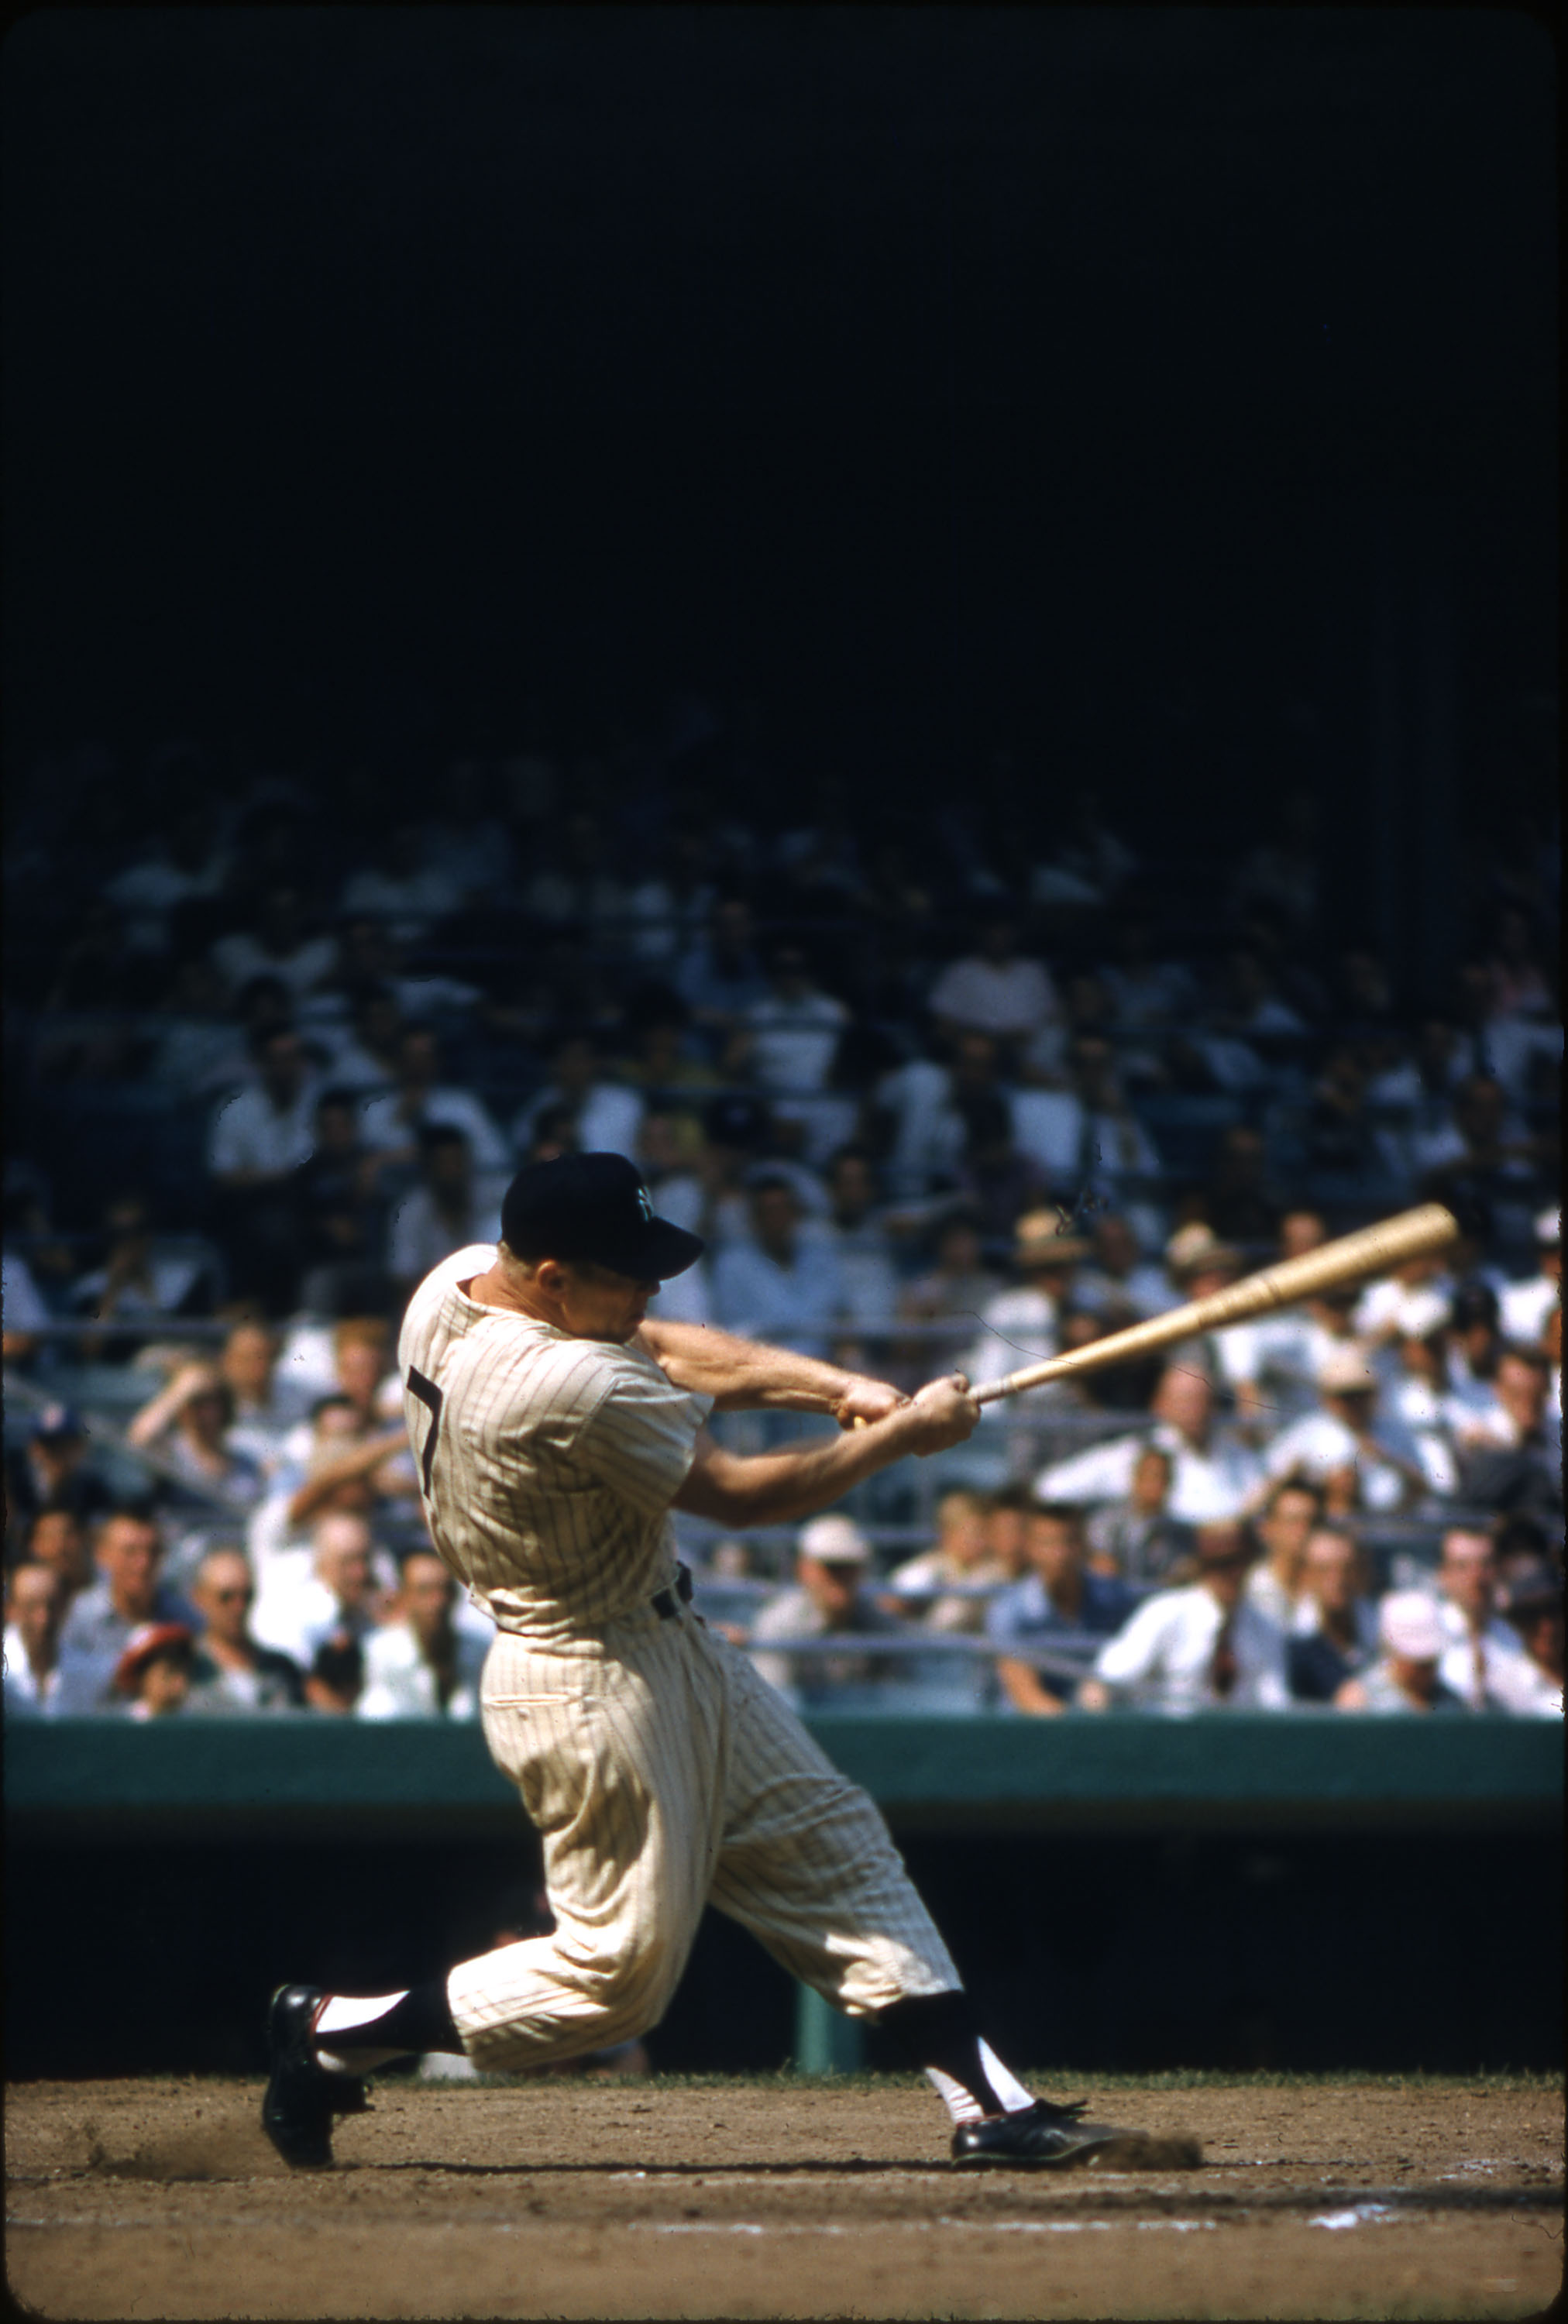 Photo of baseball great Mickey Mantle, swinging the bat at an oncoming pitch during a baseball game. He is leaning into the swing and swinging the bat to his left in this photo. He is wearing a dark baseball cap, and a white pinstriped uniform with black shoes. On his back is the number 7. In the background, crowds sit in the stadium stands watching the game.